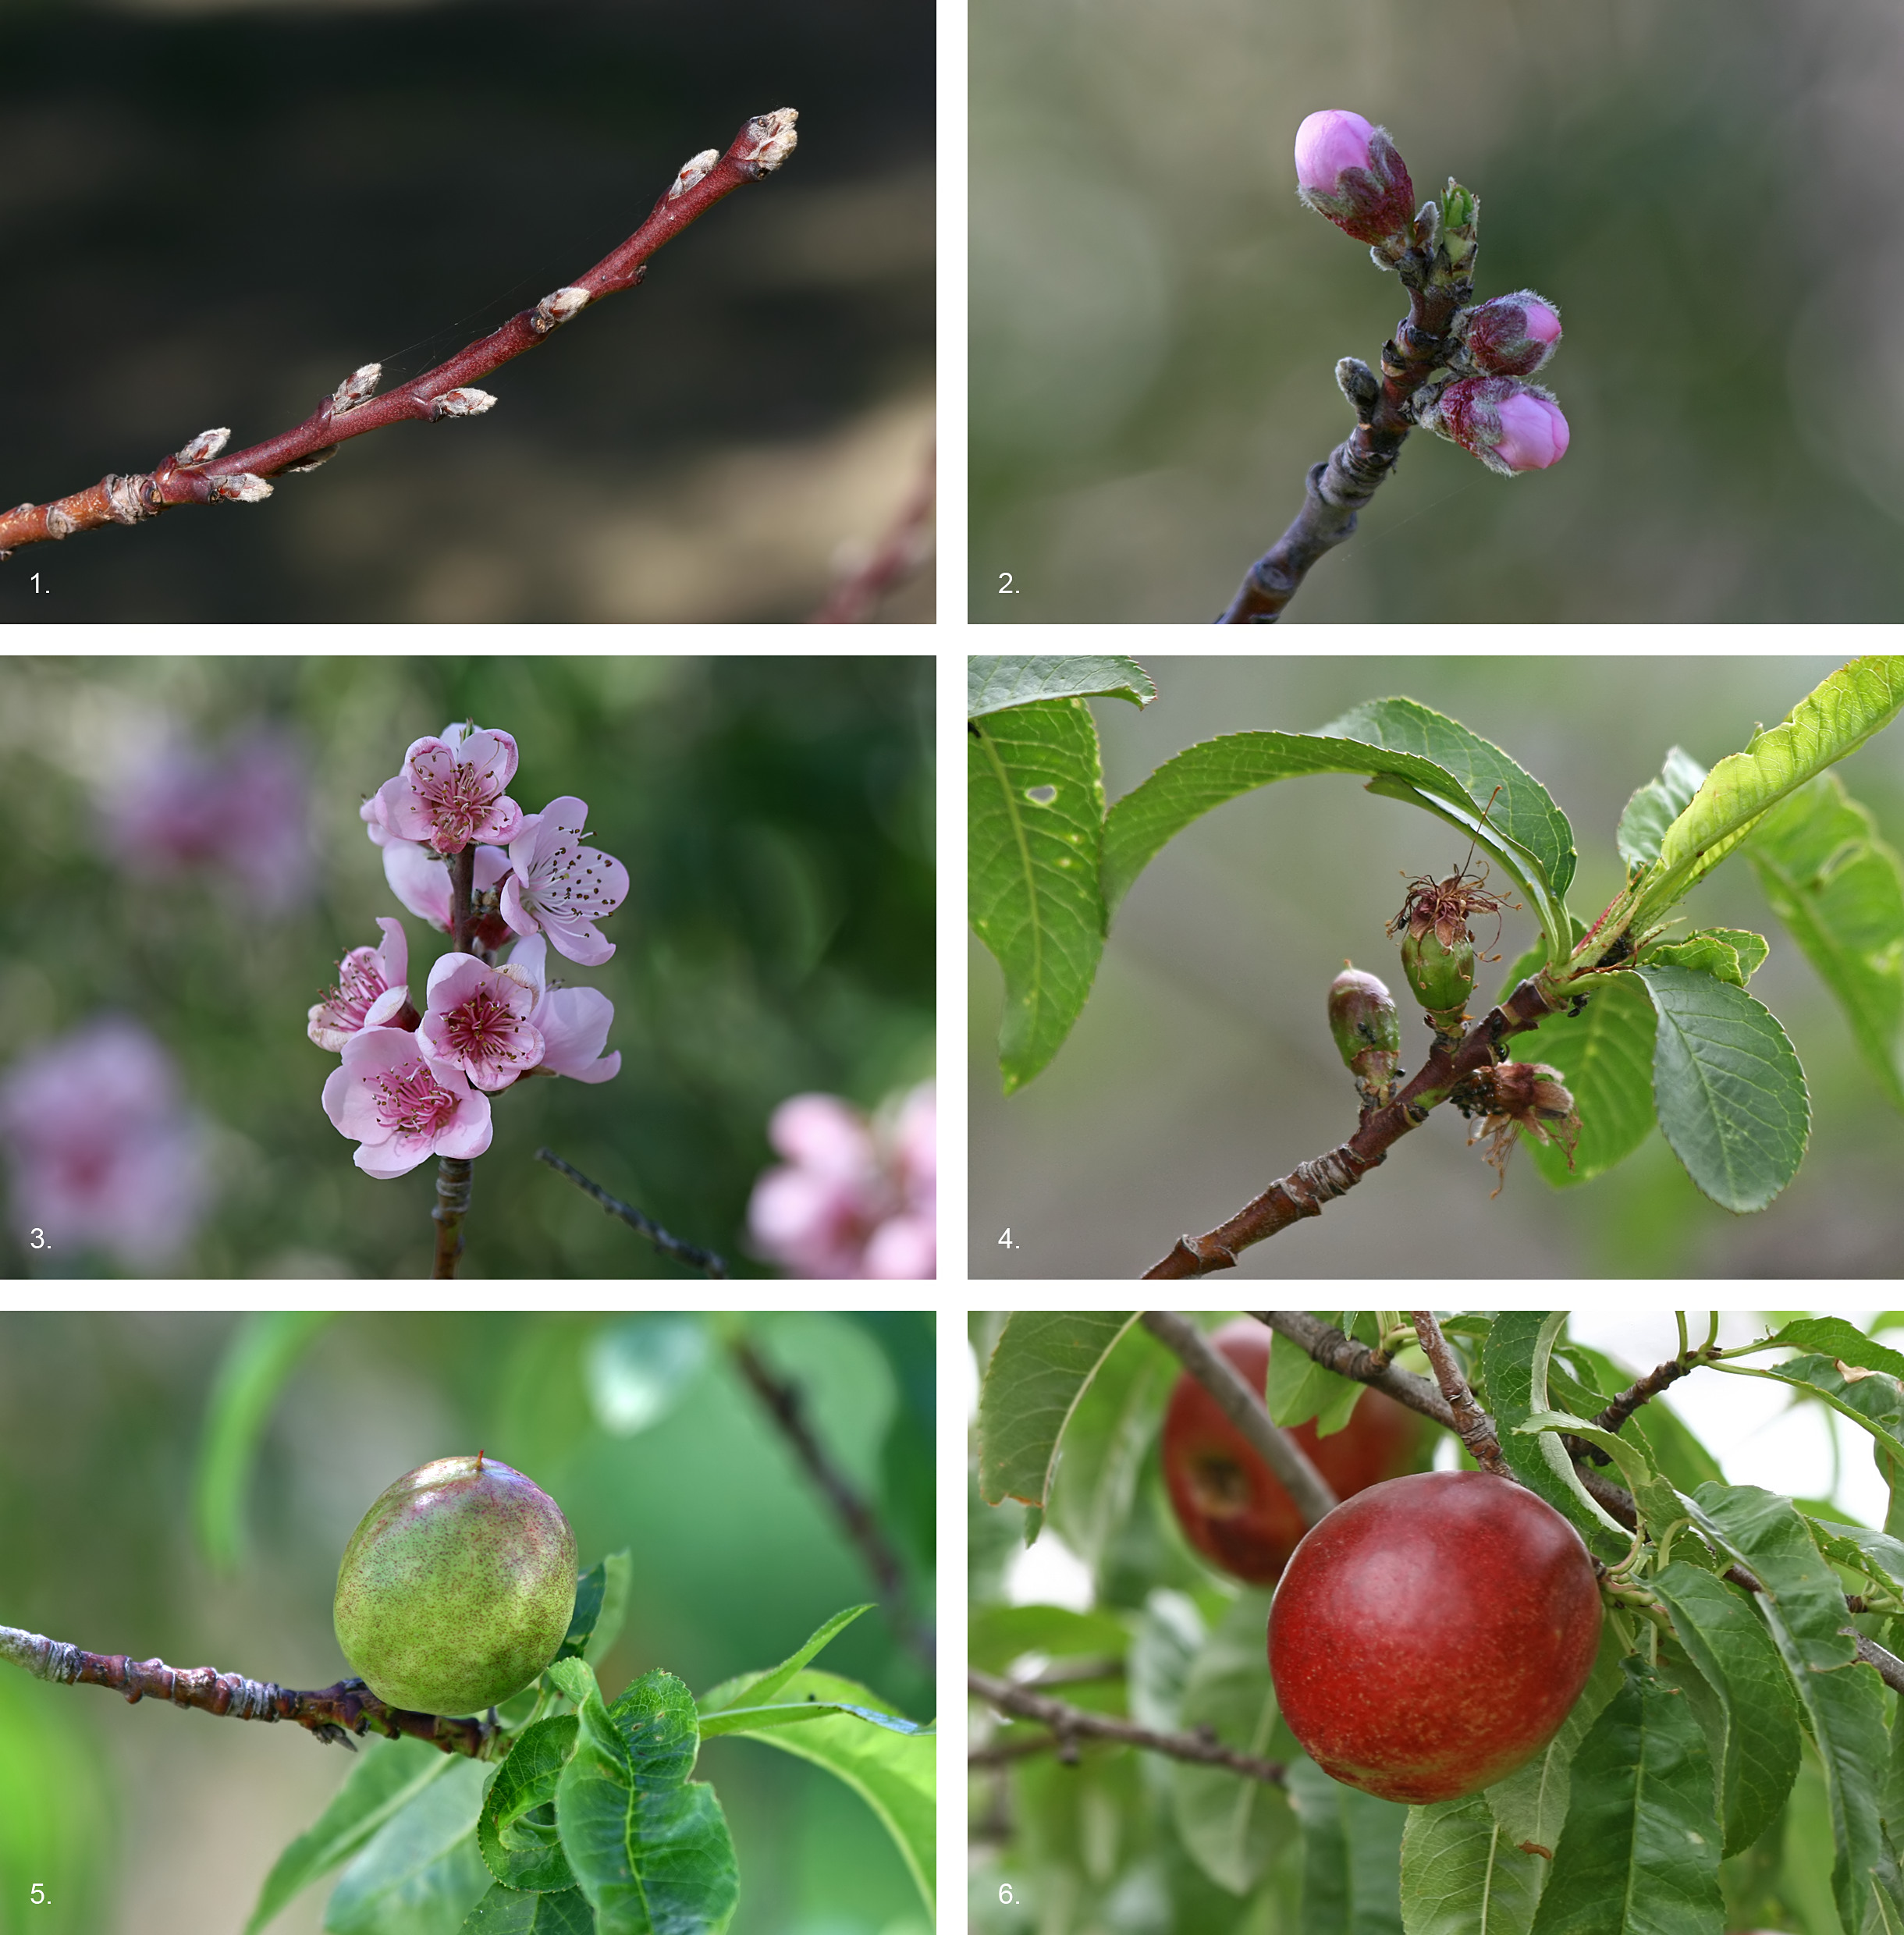 The development sequence of a typical drupe, the nectarine (Prunus persica) over a 7.5 month period, from bud formation in early winter to fruit ripening in midsummer.)1. Bud formation can be observed on new growth on the plant (early winter) 2. Flower buds clearly formed and leaves start to develop (early spring, ≈ 3 months) . 3. Flowers fully develop and are pollinated by wind or insects (early spring, ≈ 3½ months). 4. If successfully pollinated, flowers die back and incipient fruit can be observed; leaves have quickly grown to provide tree with food and energy from photosynthesis (mid-spring, ≈ 4 months). 5. Fruit is well developed and continues to grow (late spring, ≈ 5½ months). 6. Fruit fully ripens to an edible form to encourage spreading of seed contained within by animals (midsummer, ≈ 7½ months)